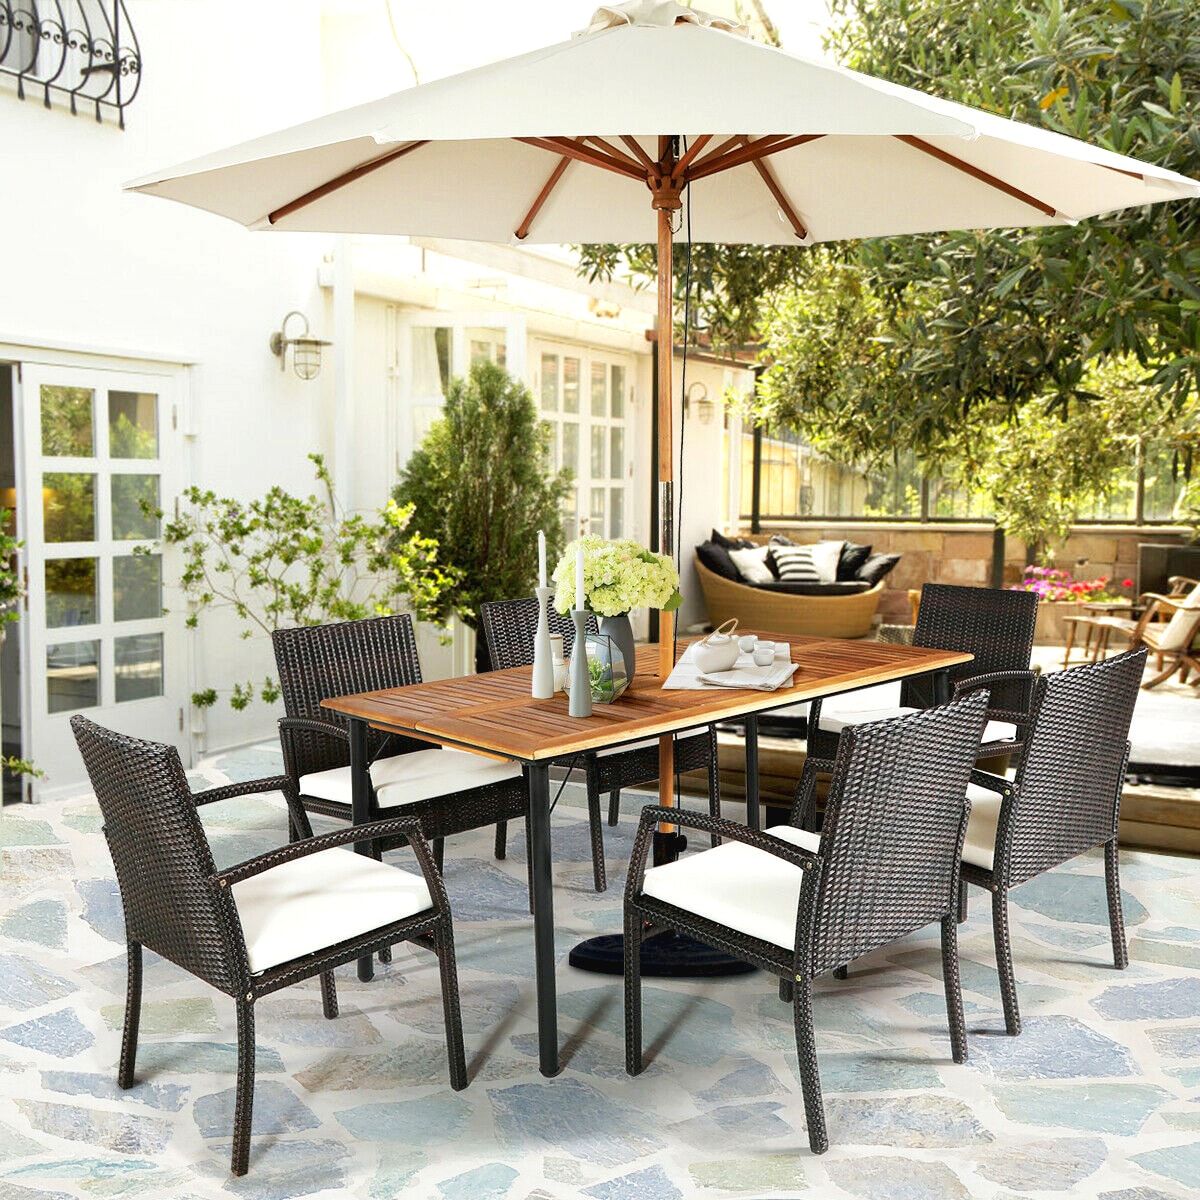 Exceptional Selections: The Beauty of Patio Dining Sets